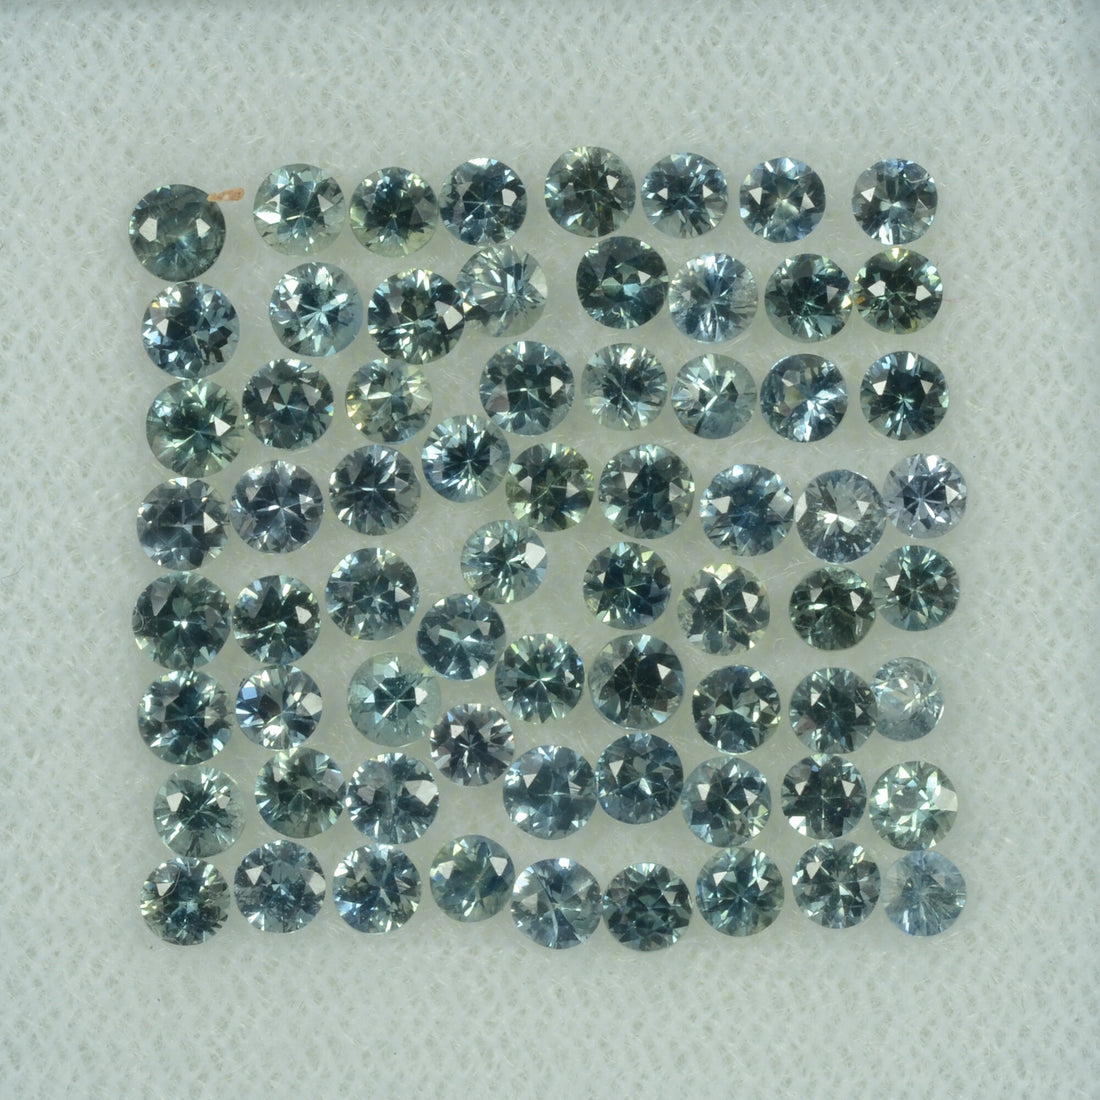 1.5-4.5 mm Natural Teal Green Sapphire Loose Gemstone Round Diamond Cut Color